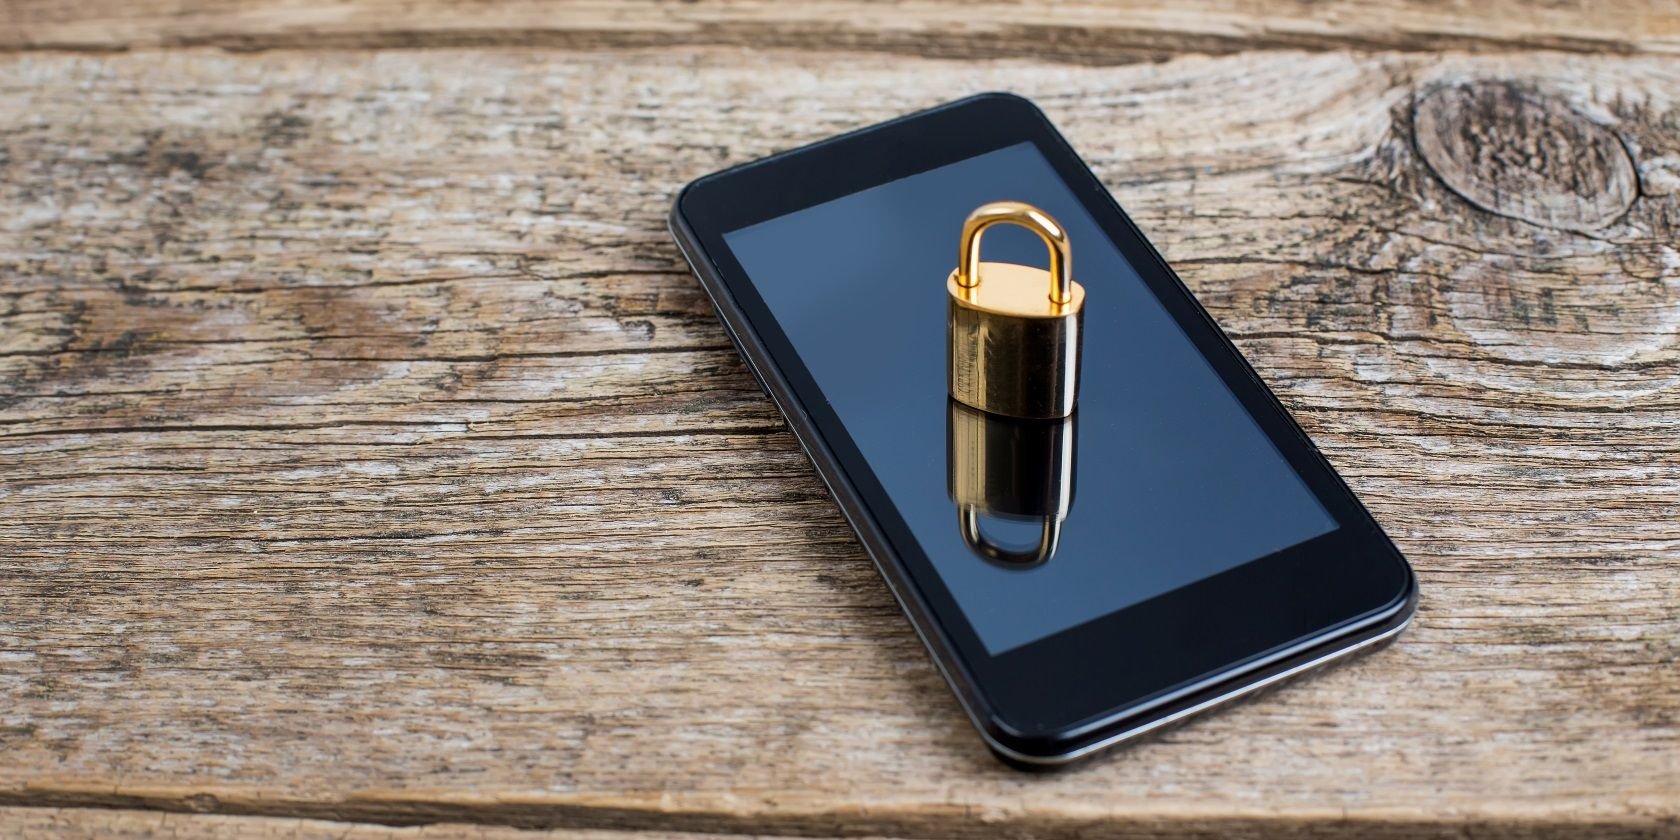 The 7 Best Android Anti-Theft Apps to Protect Your Phone